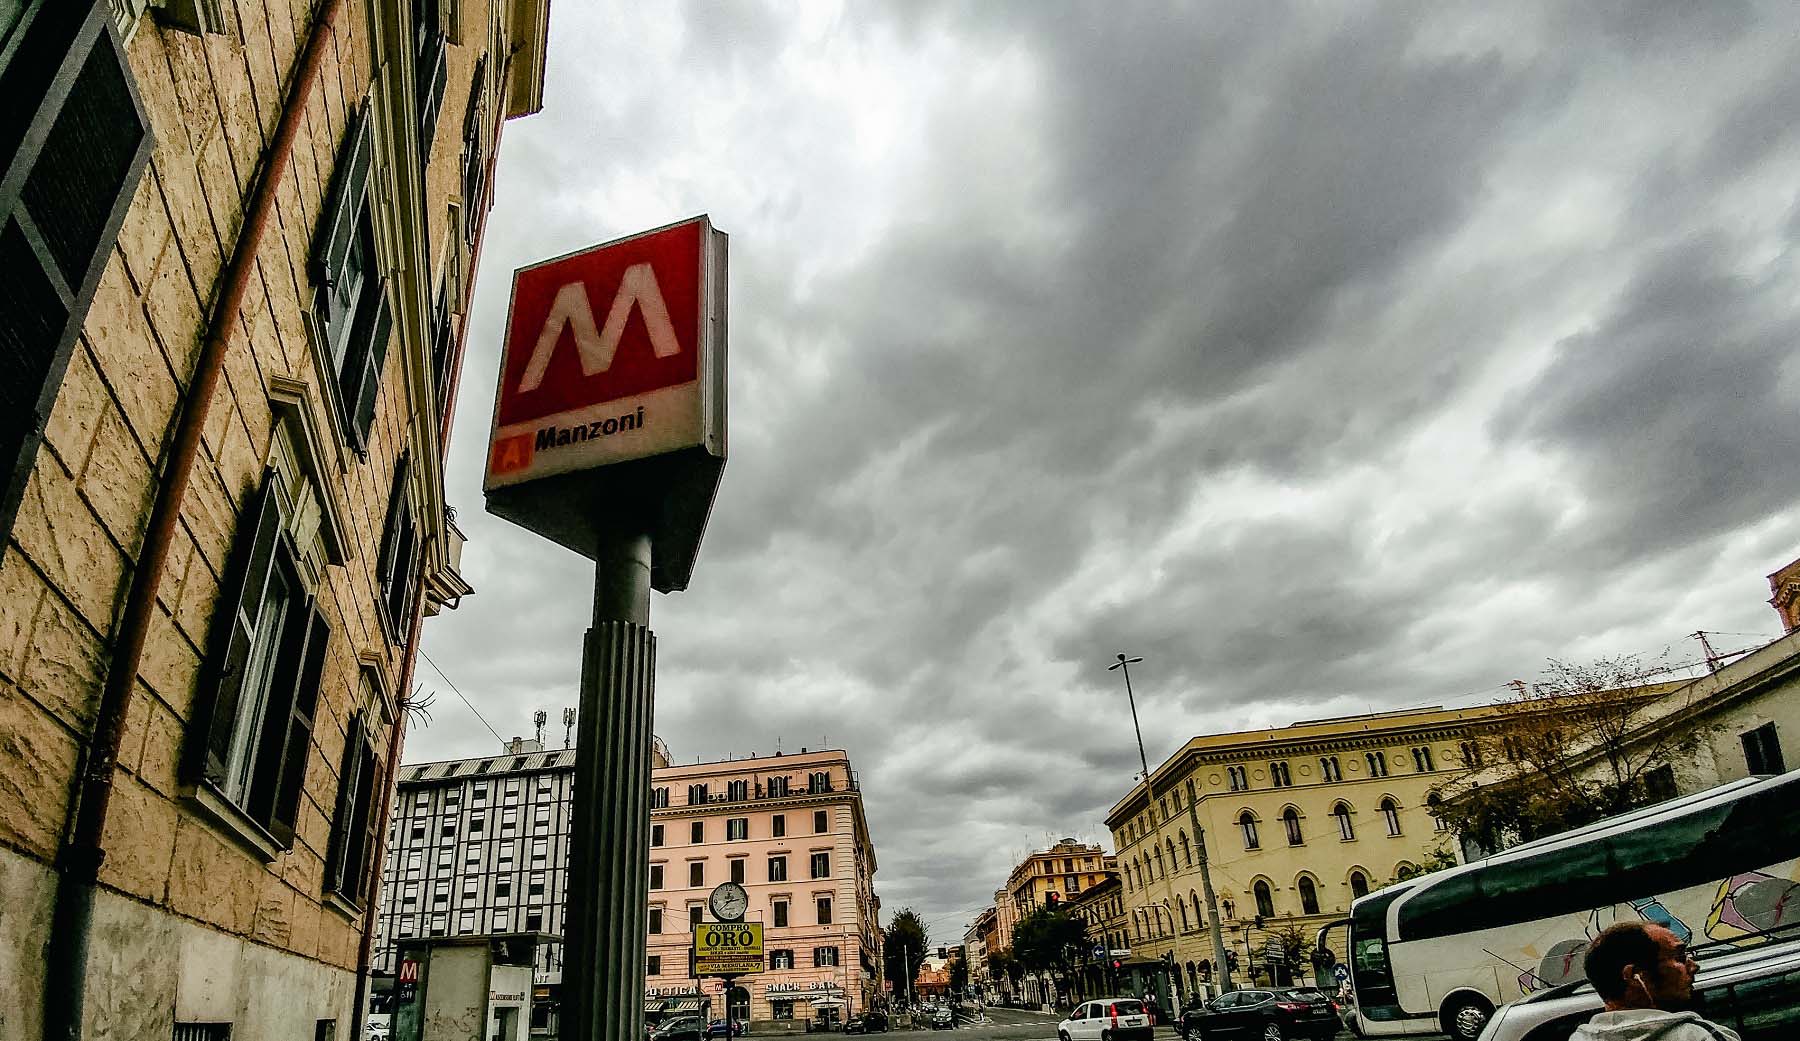 The view outside Manzoni station in Rome